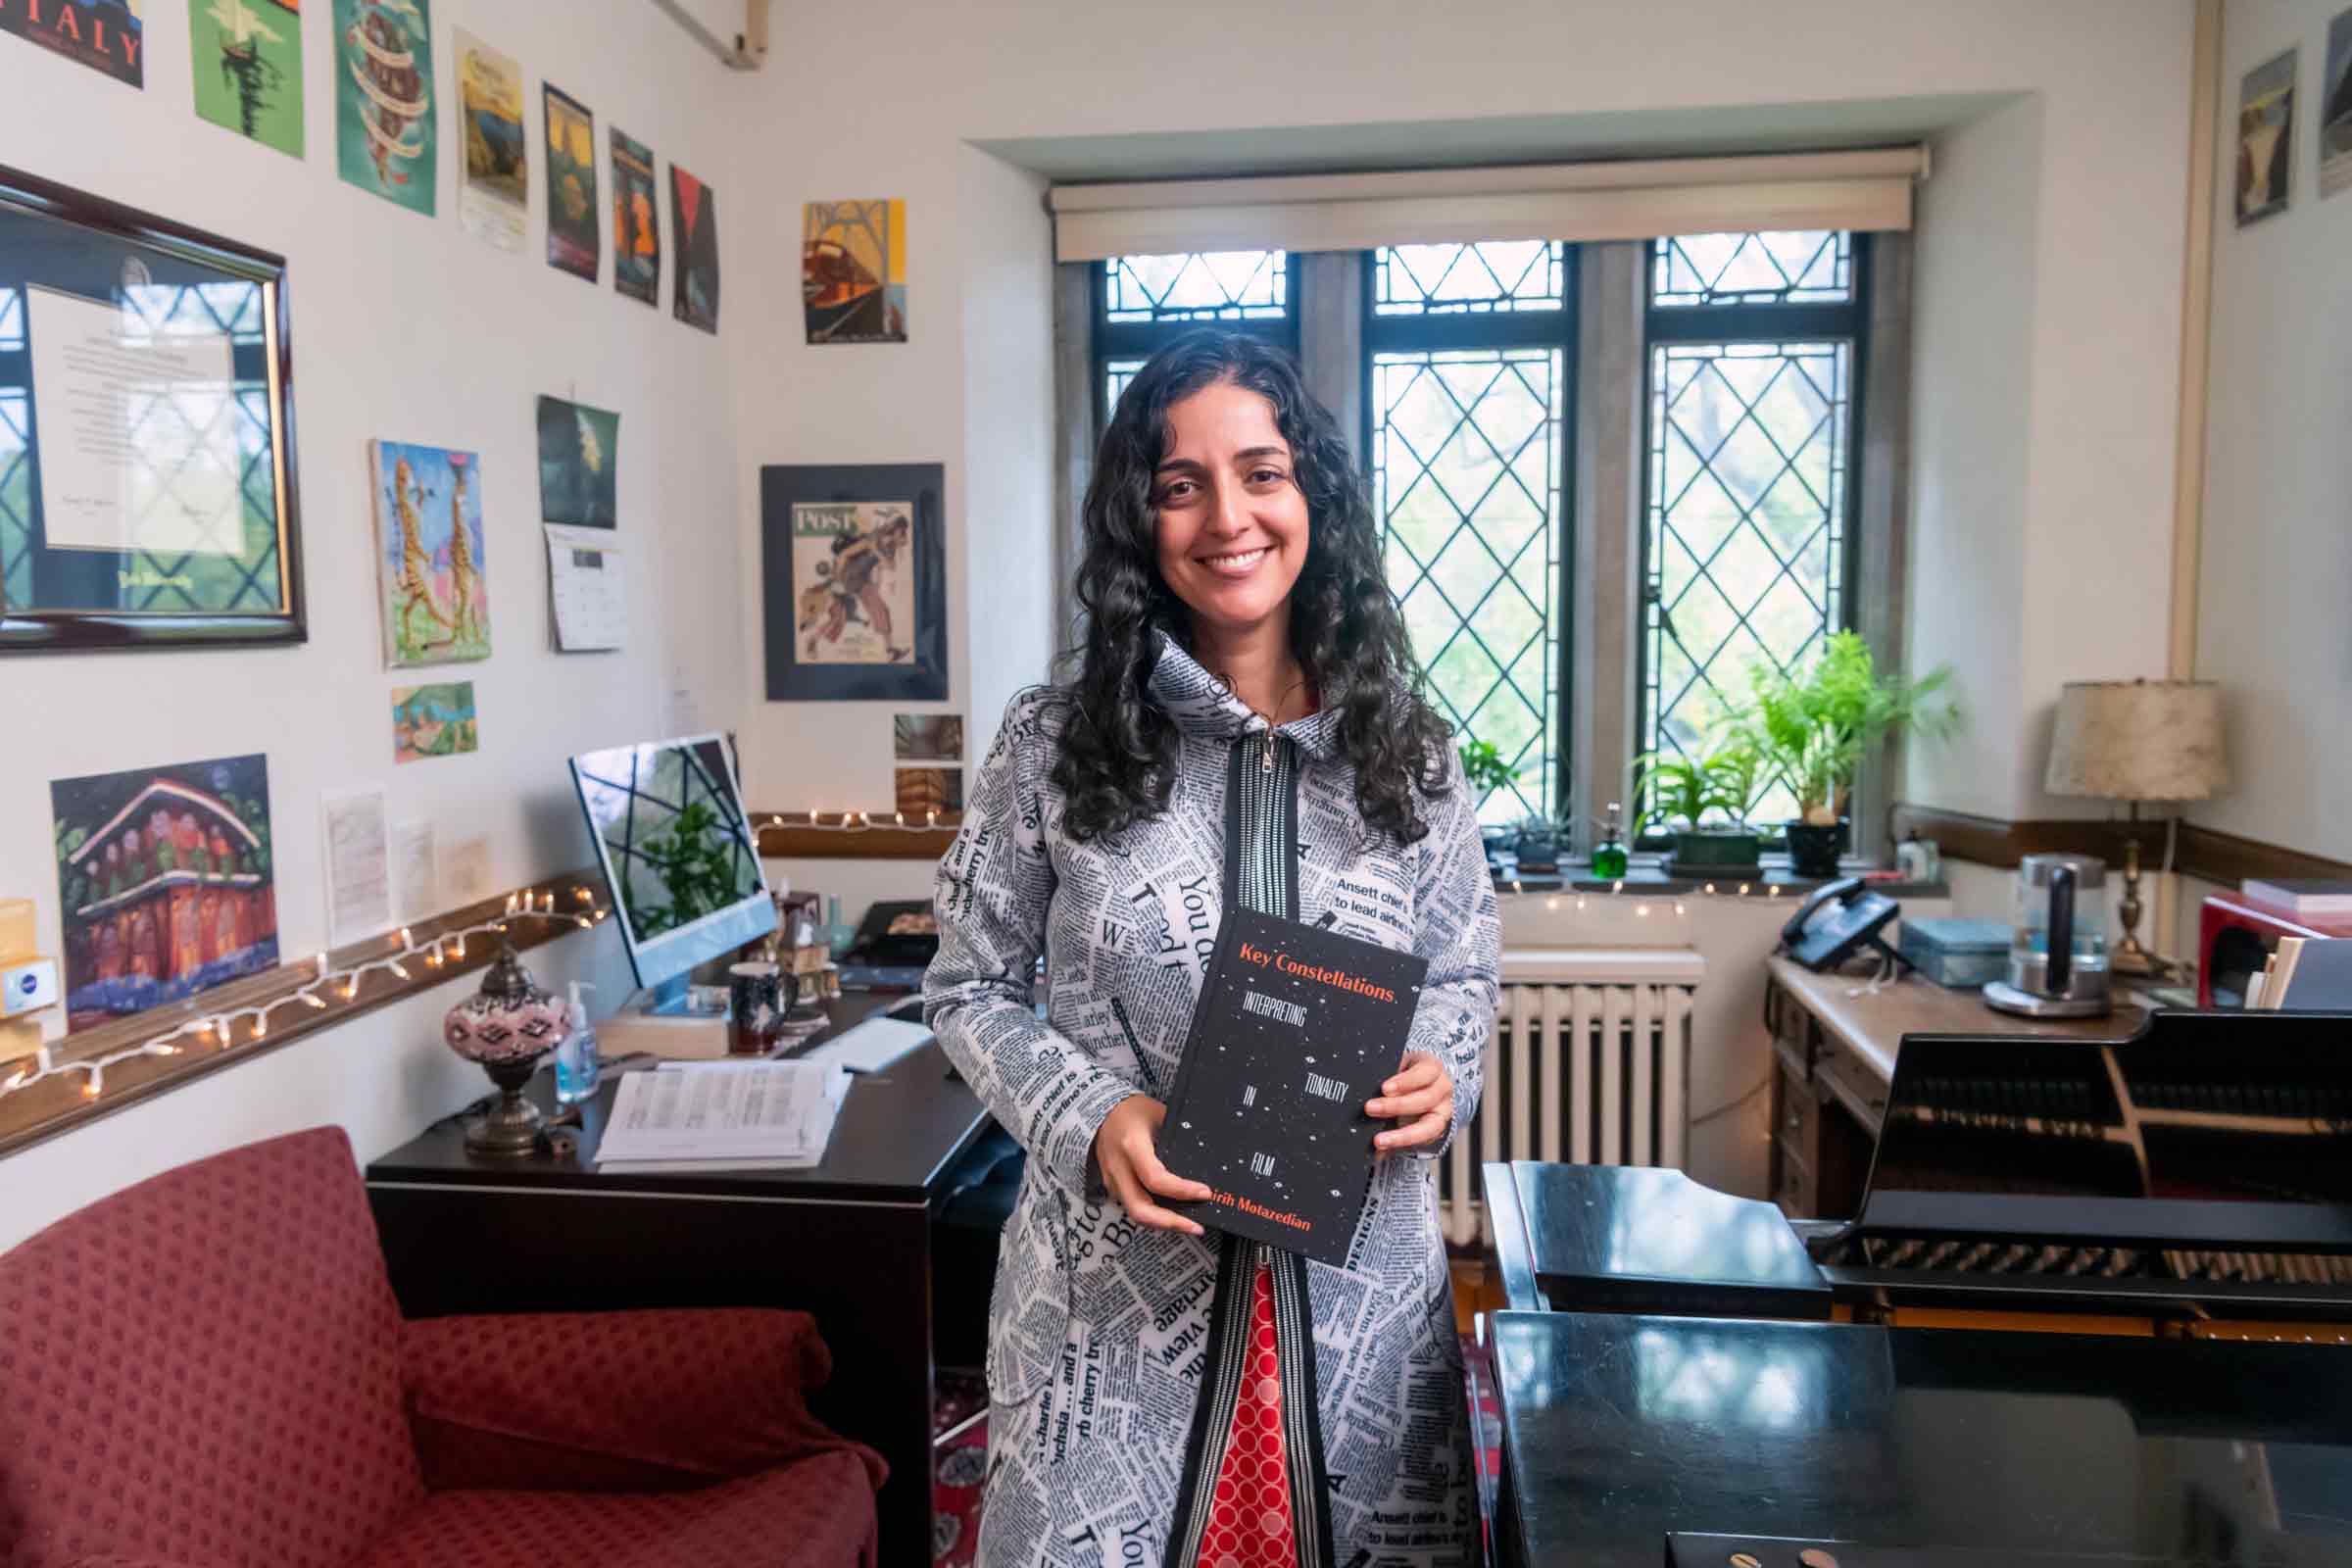 Smiling person holding a book in a study